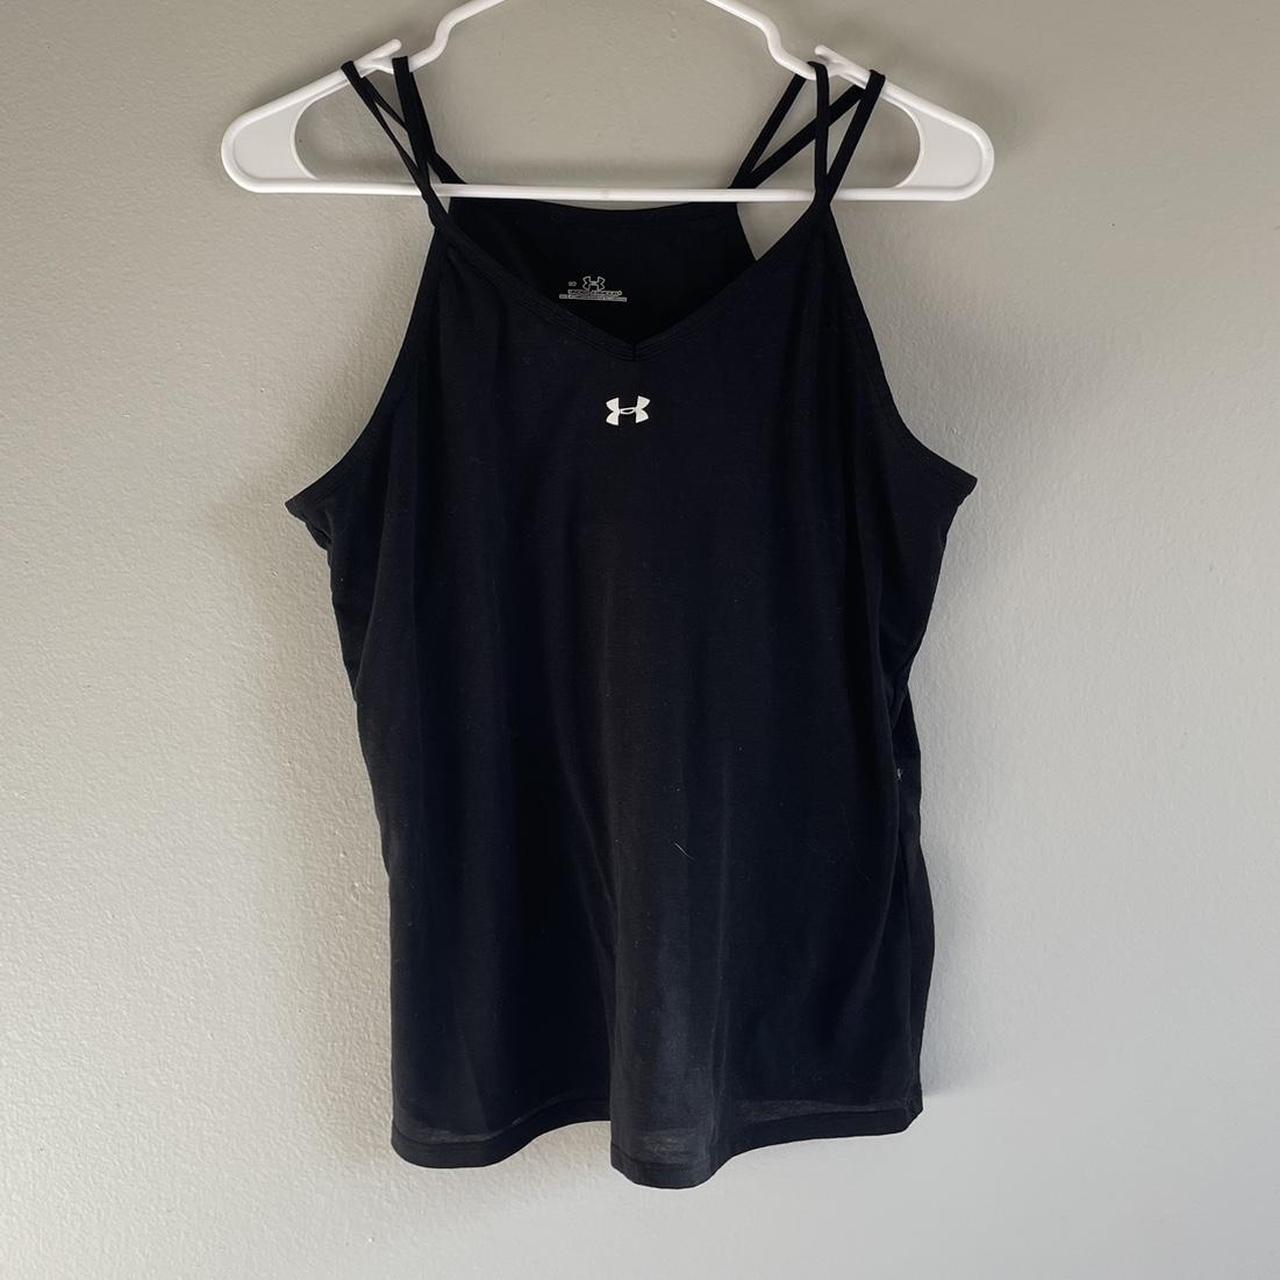 under armor workout tank top - size large - great... - Depop